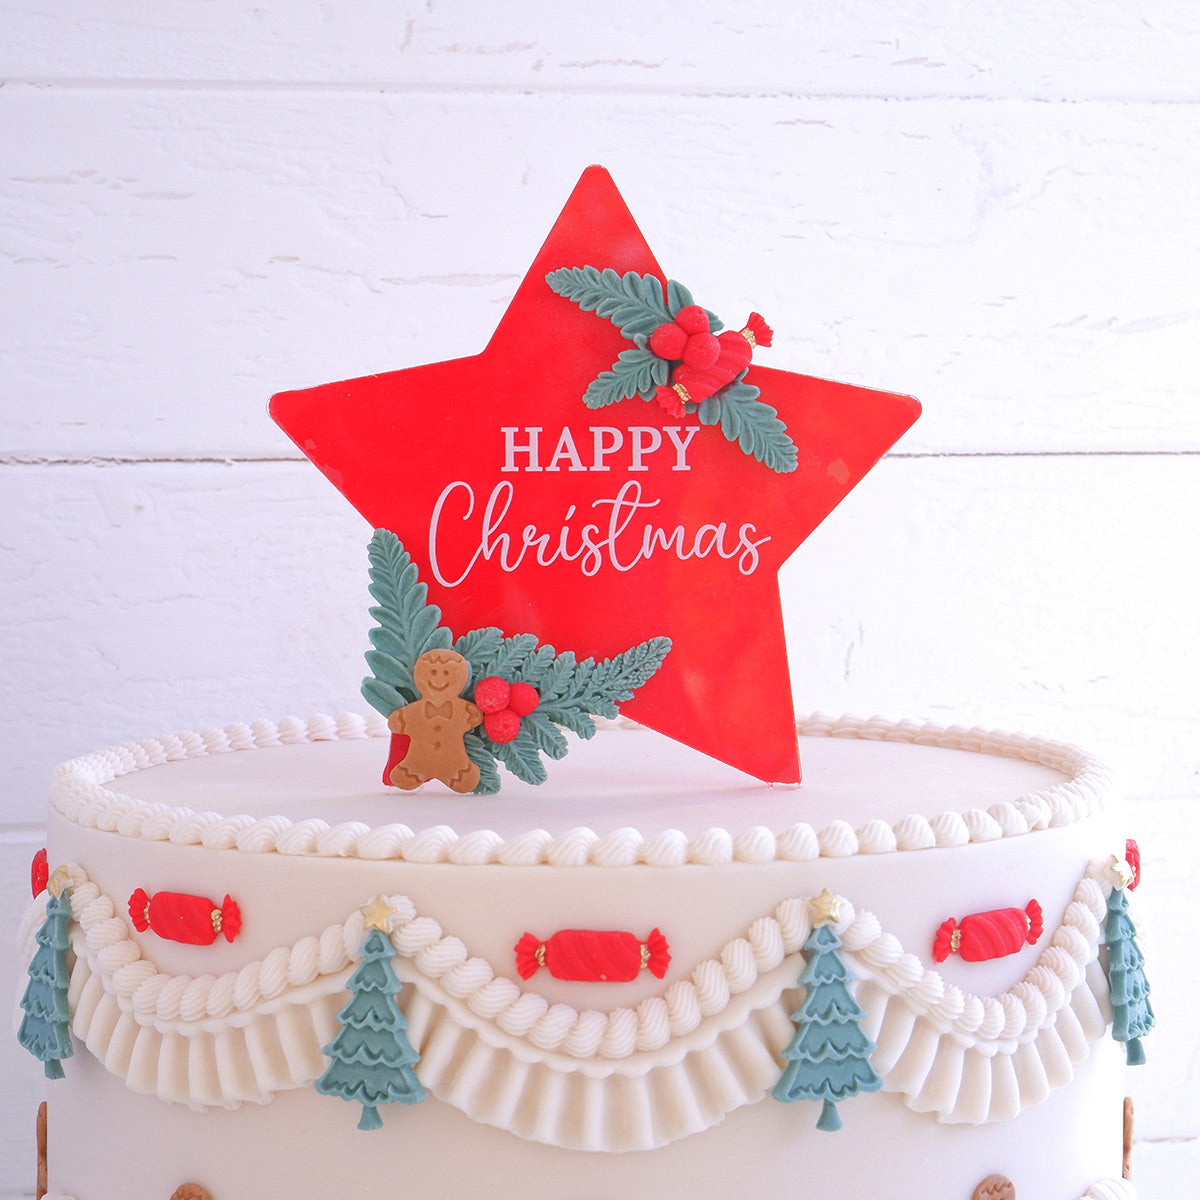 Happy Christmas Clear Acrylic Star Topper - White Wording